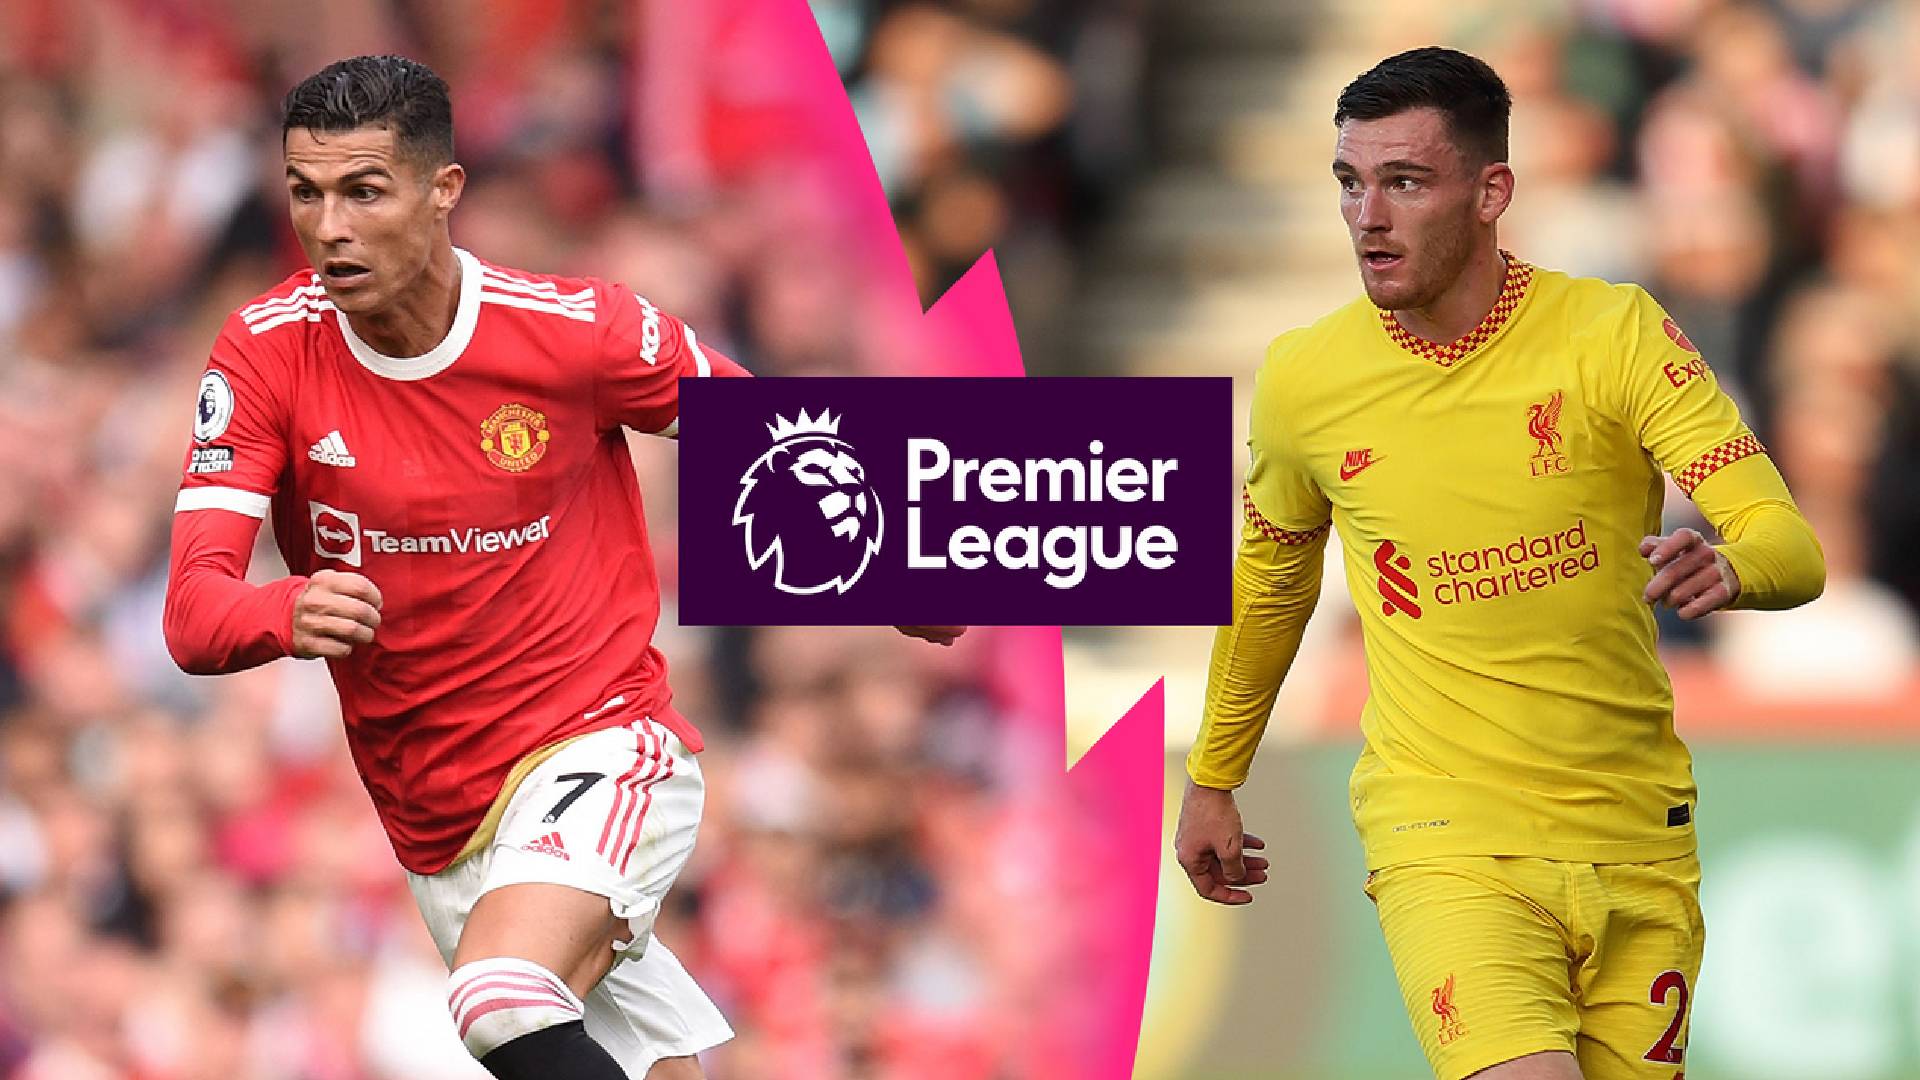 Live Streaming: Manchester United vs Liverpool